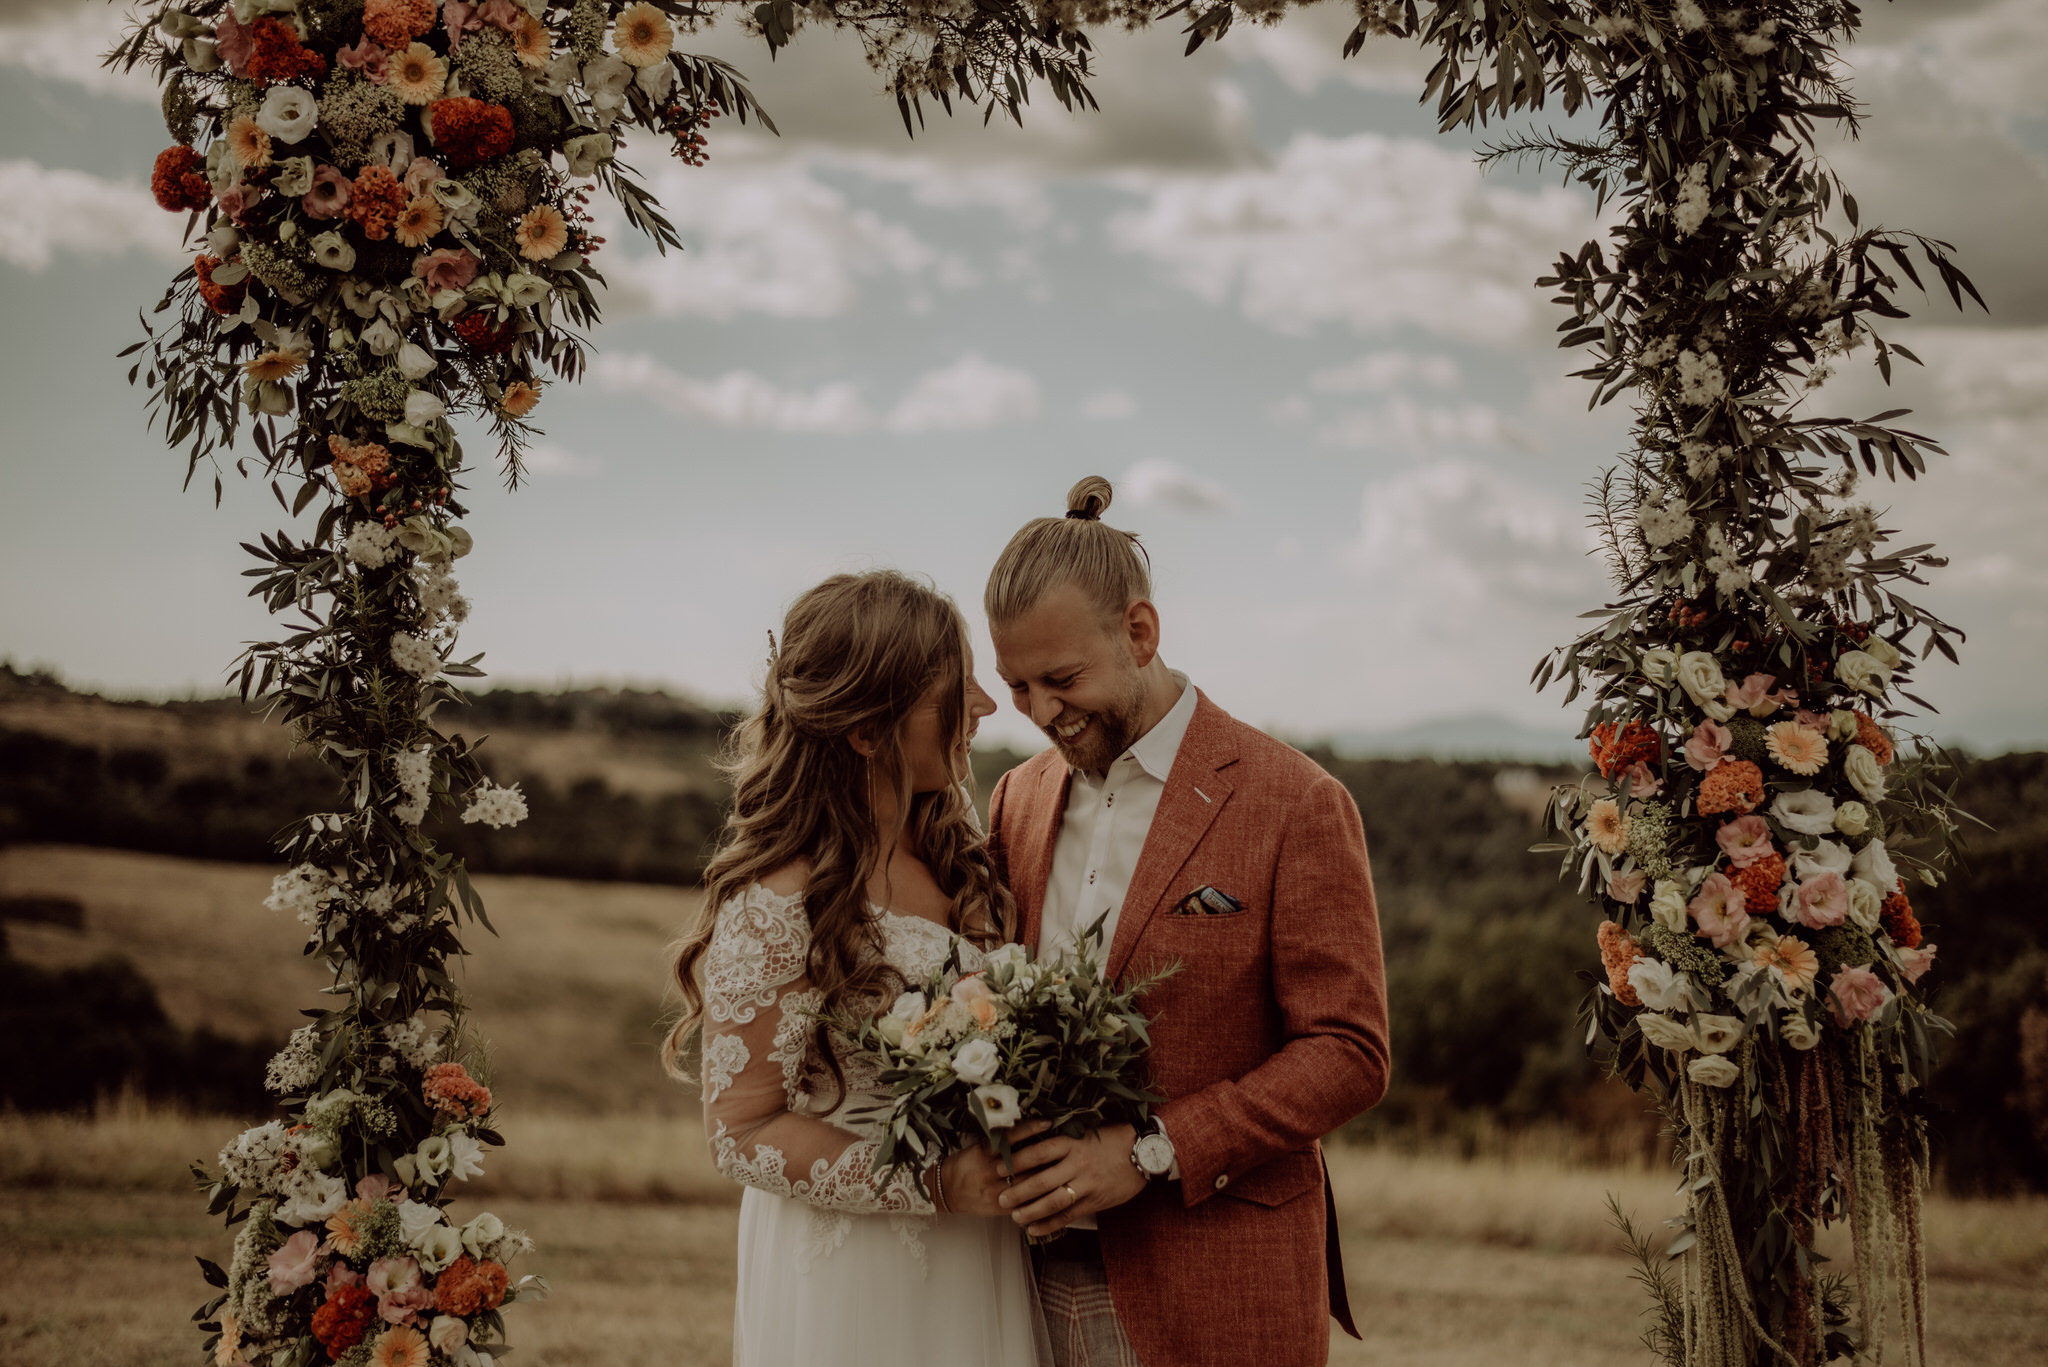 Destination wedding in Tuscany from Netherlands - couple just married